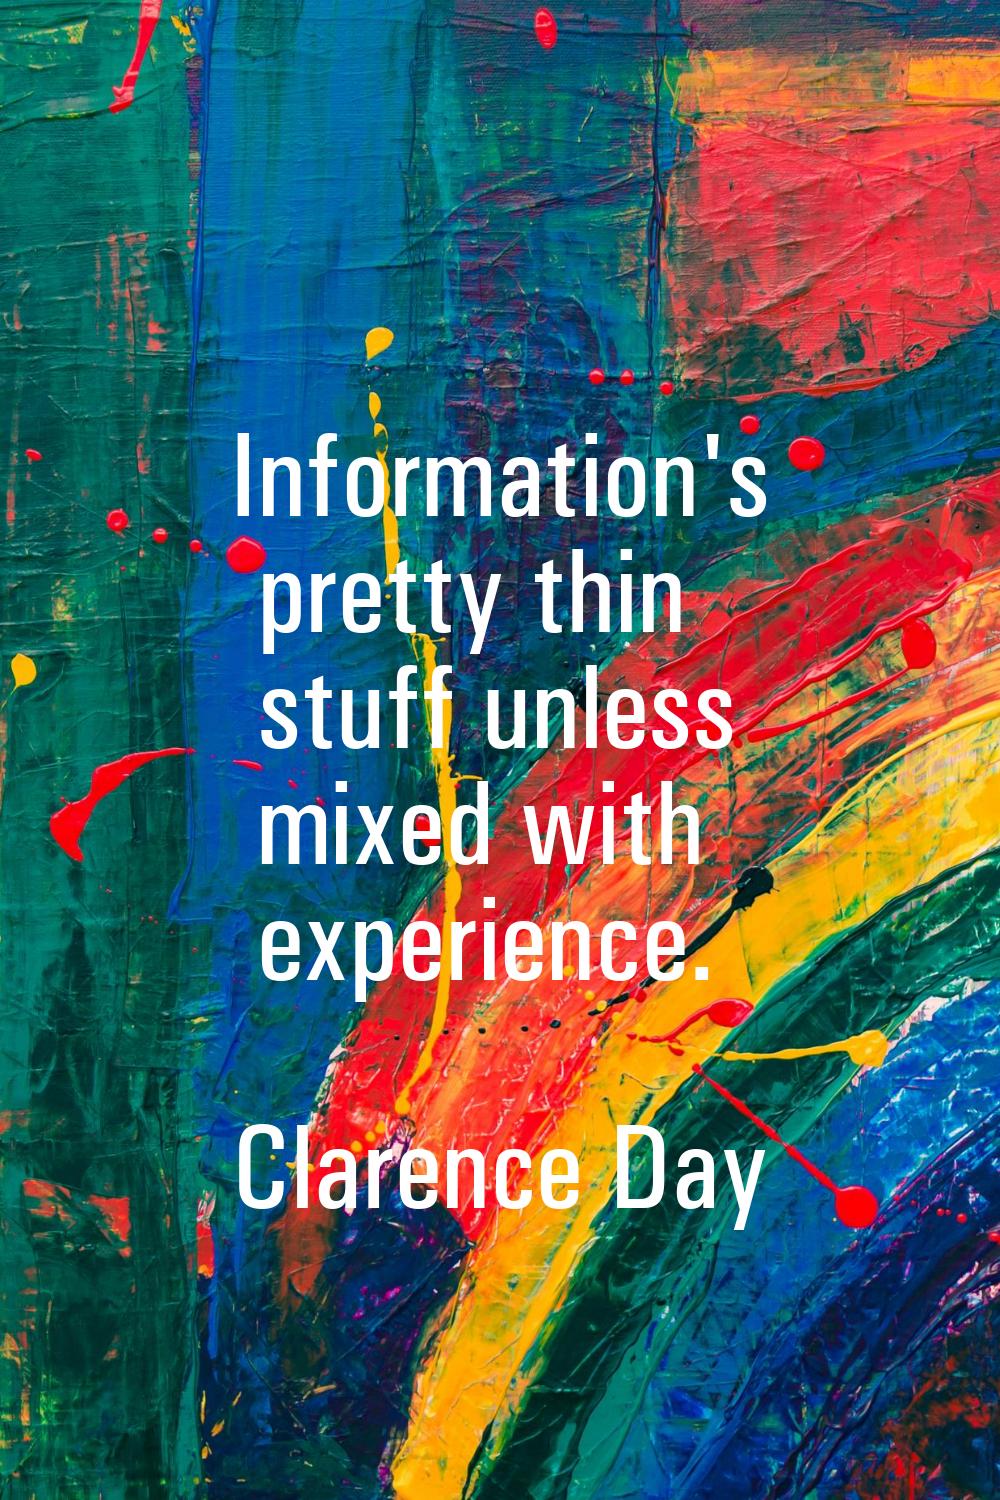 Information's pretty thin stuff unless mixed with experience.